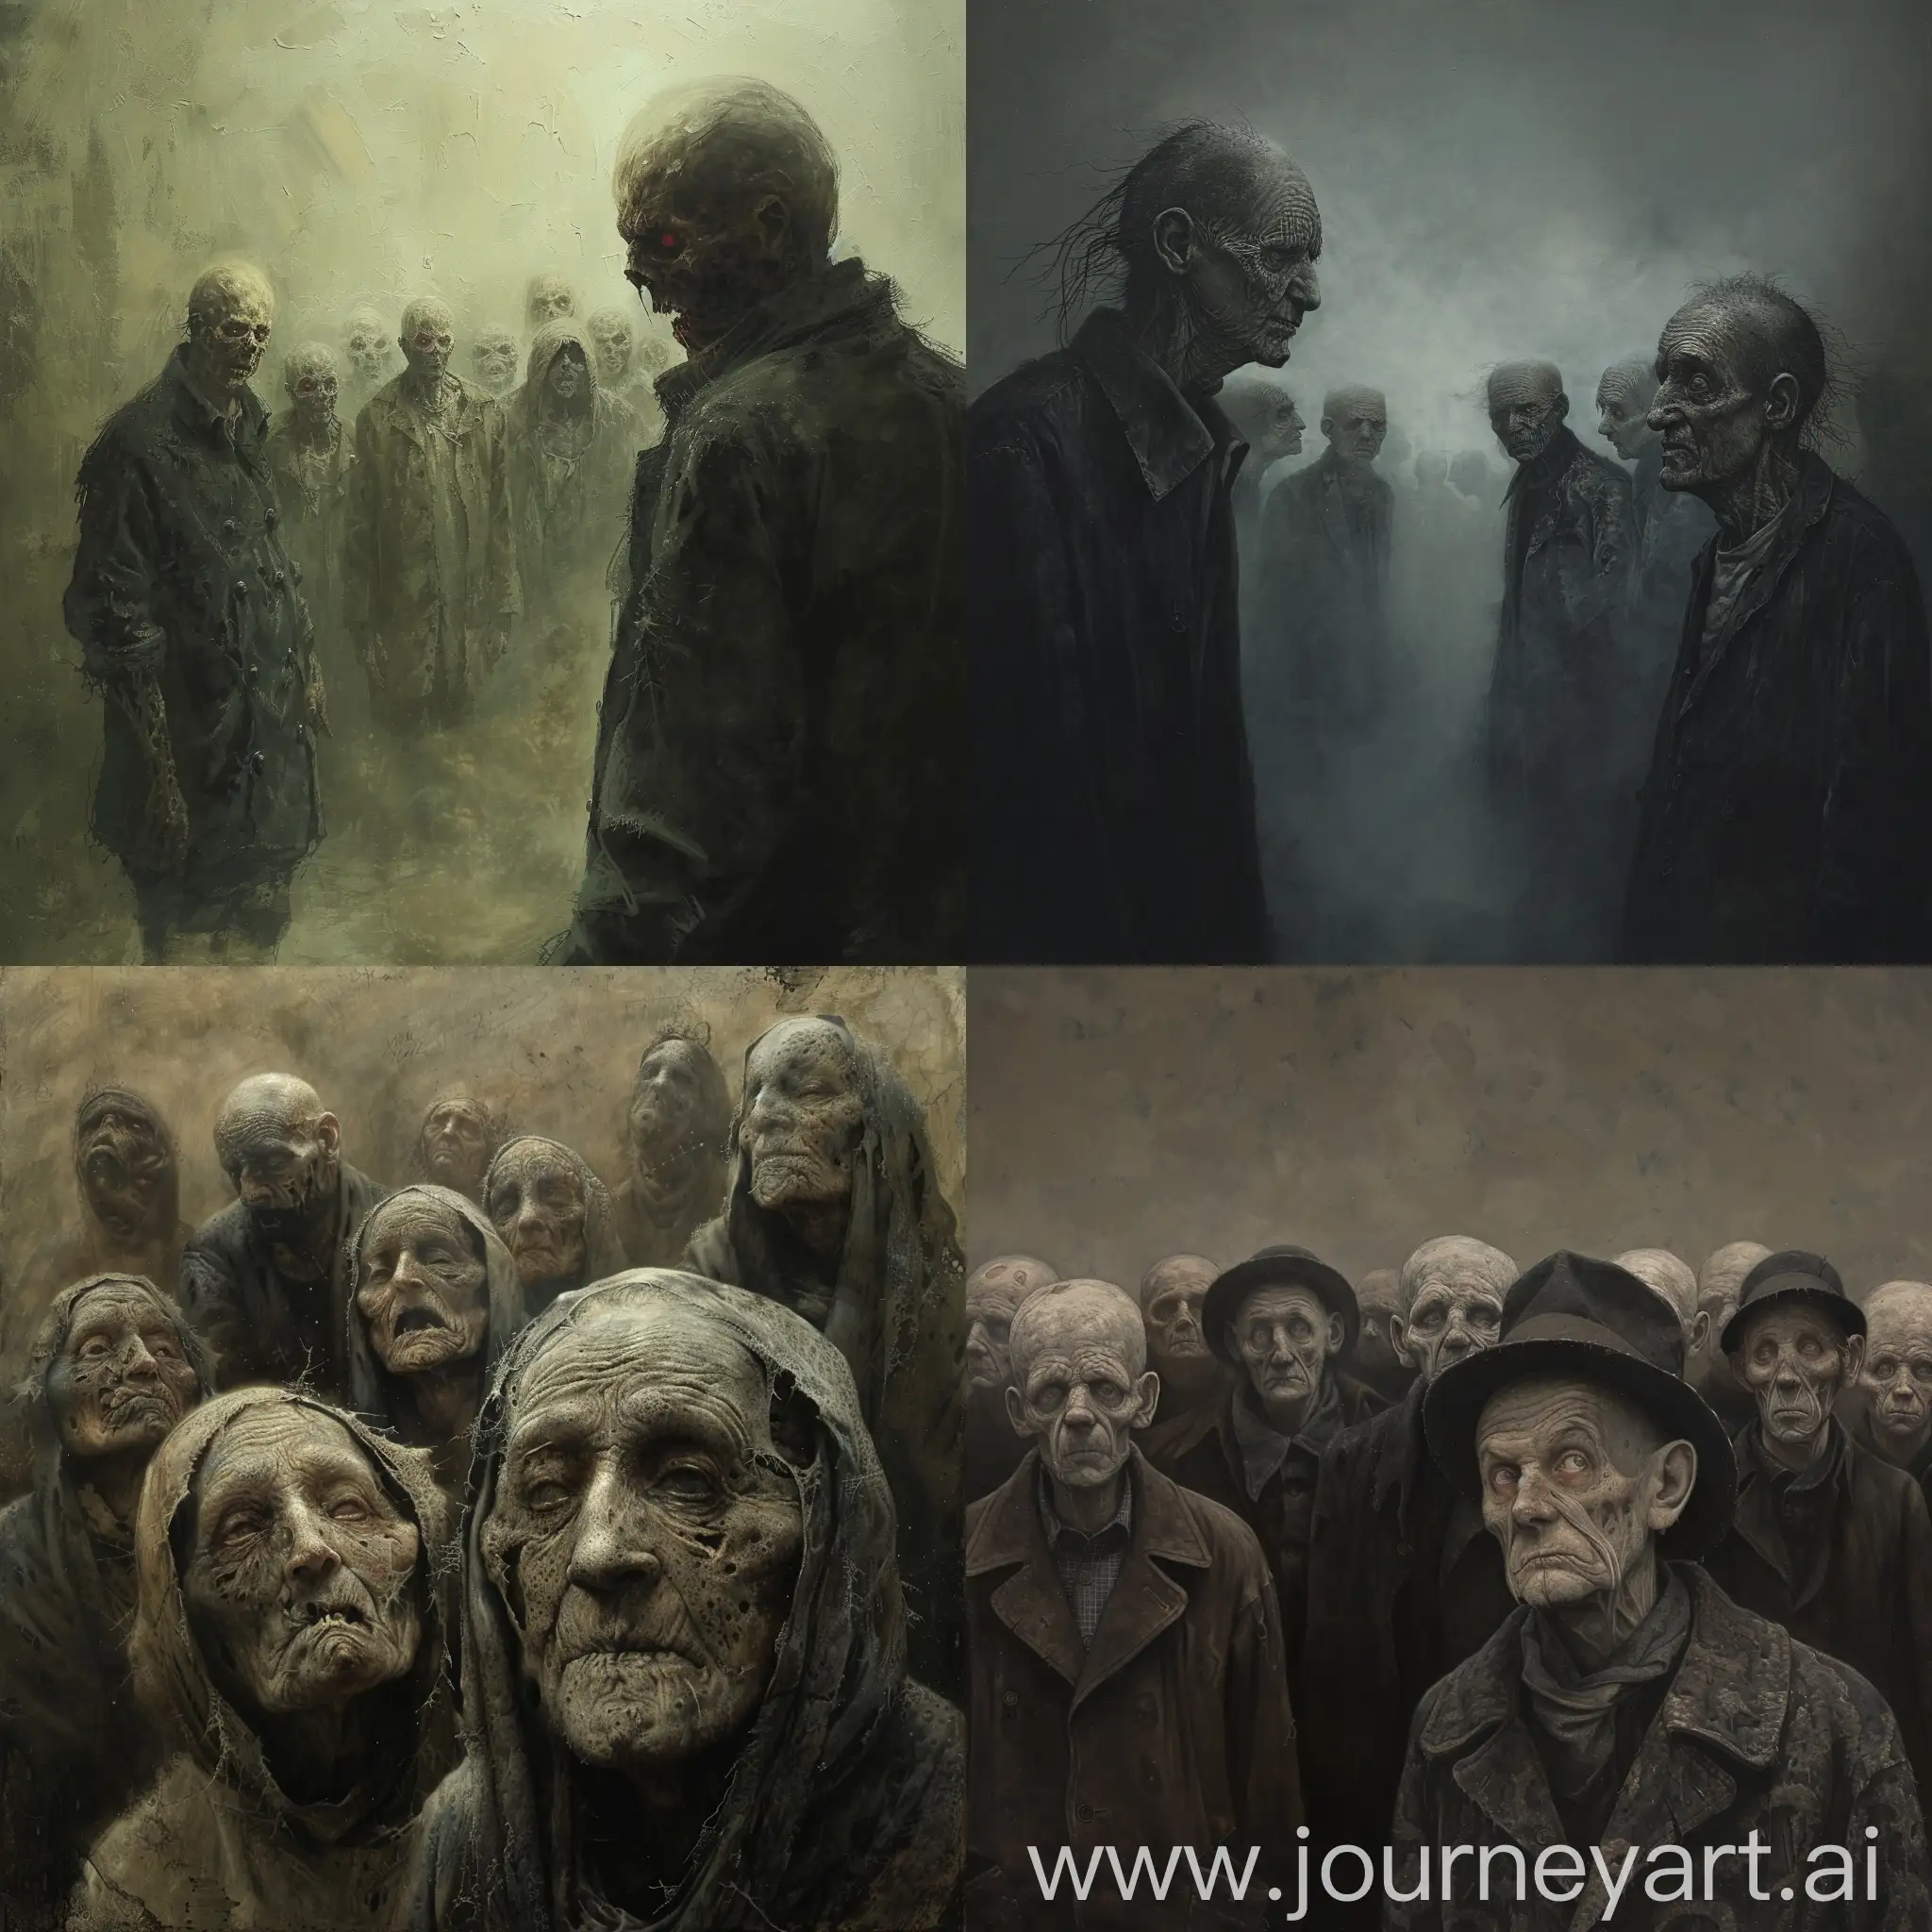 Weird decrepit people WITH VACANT LOOKS staring at person Beksinski, grotesque, dark, haunting, unsettling